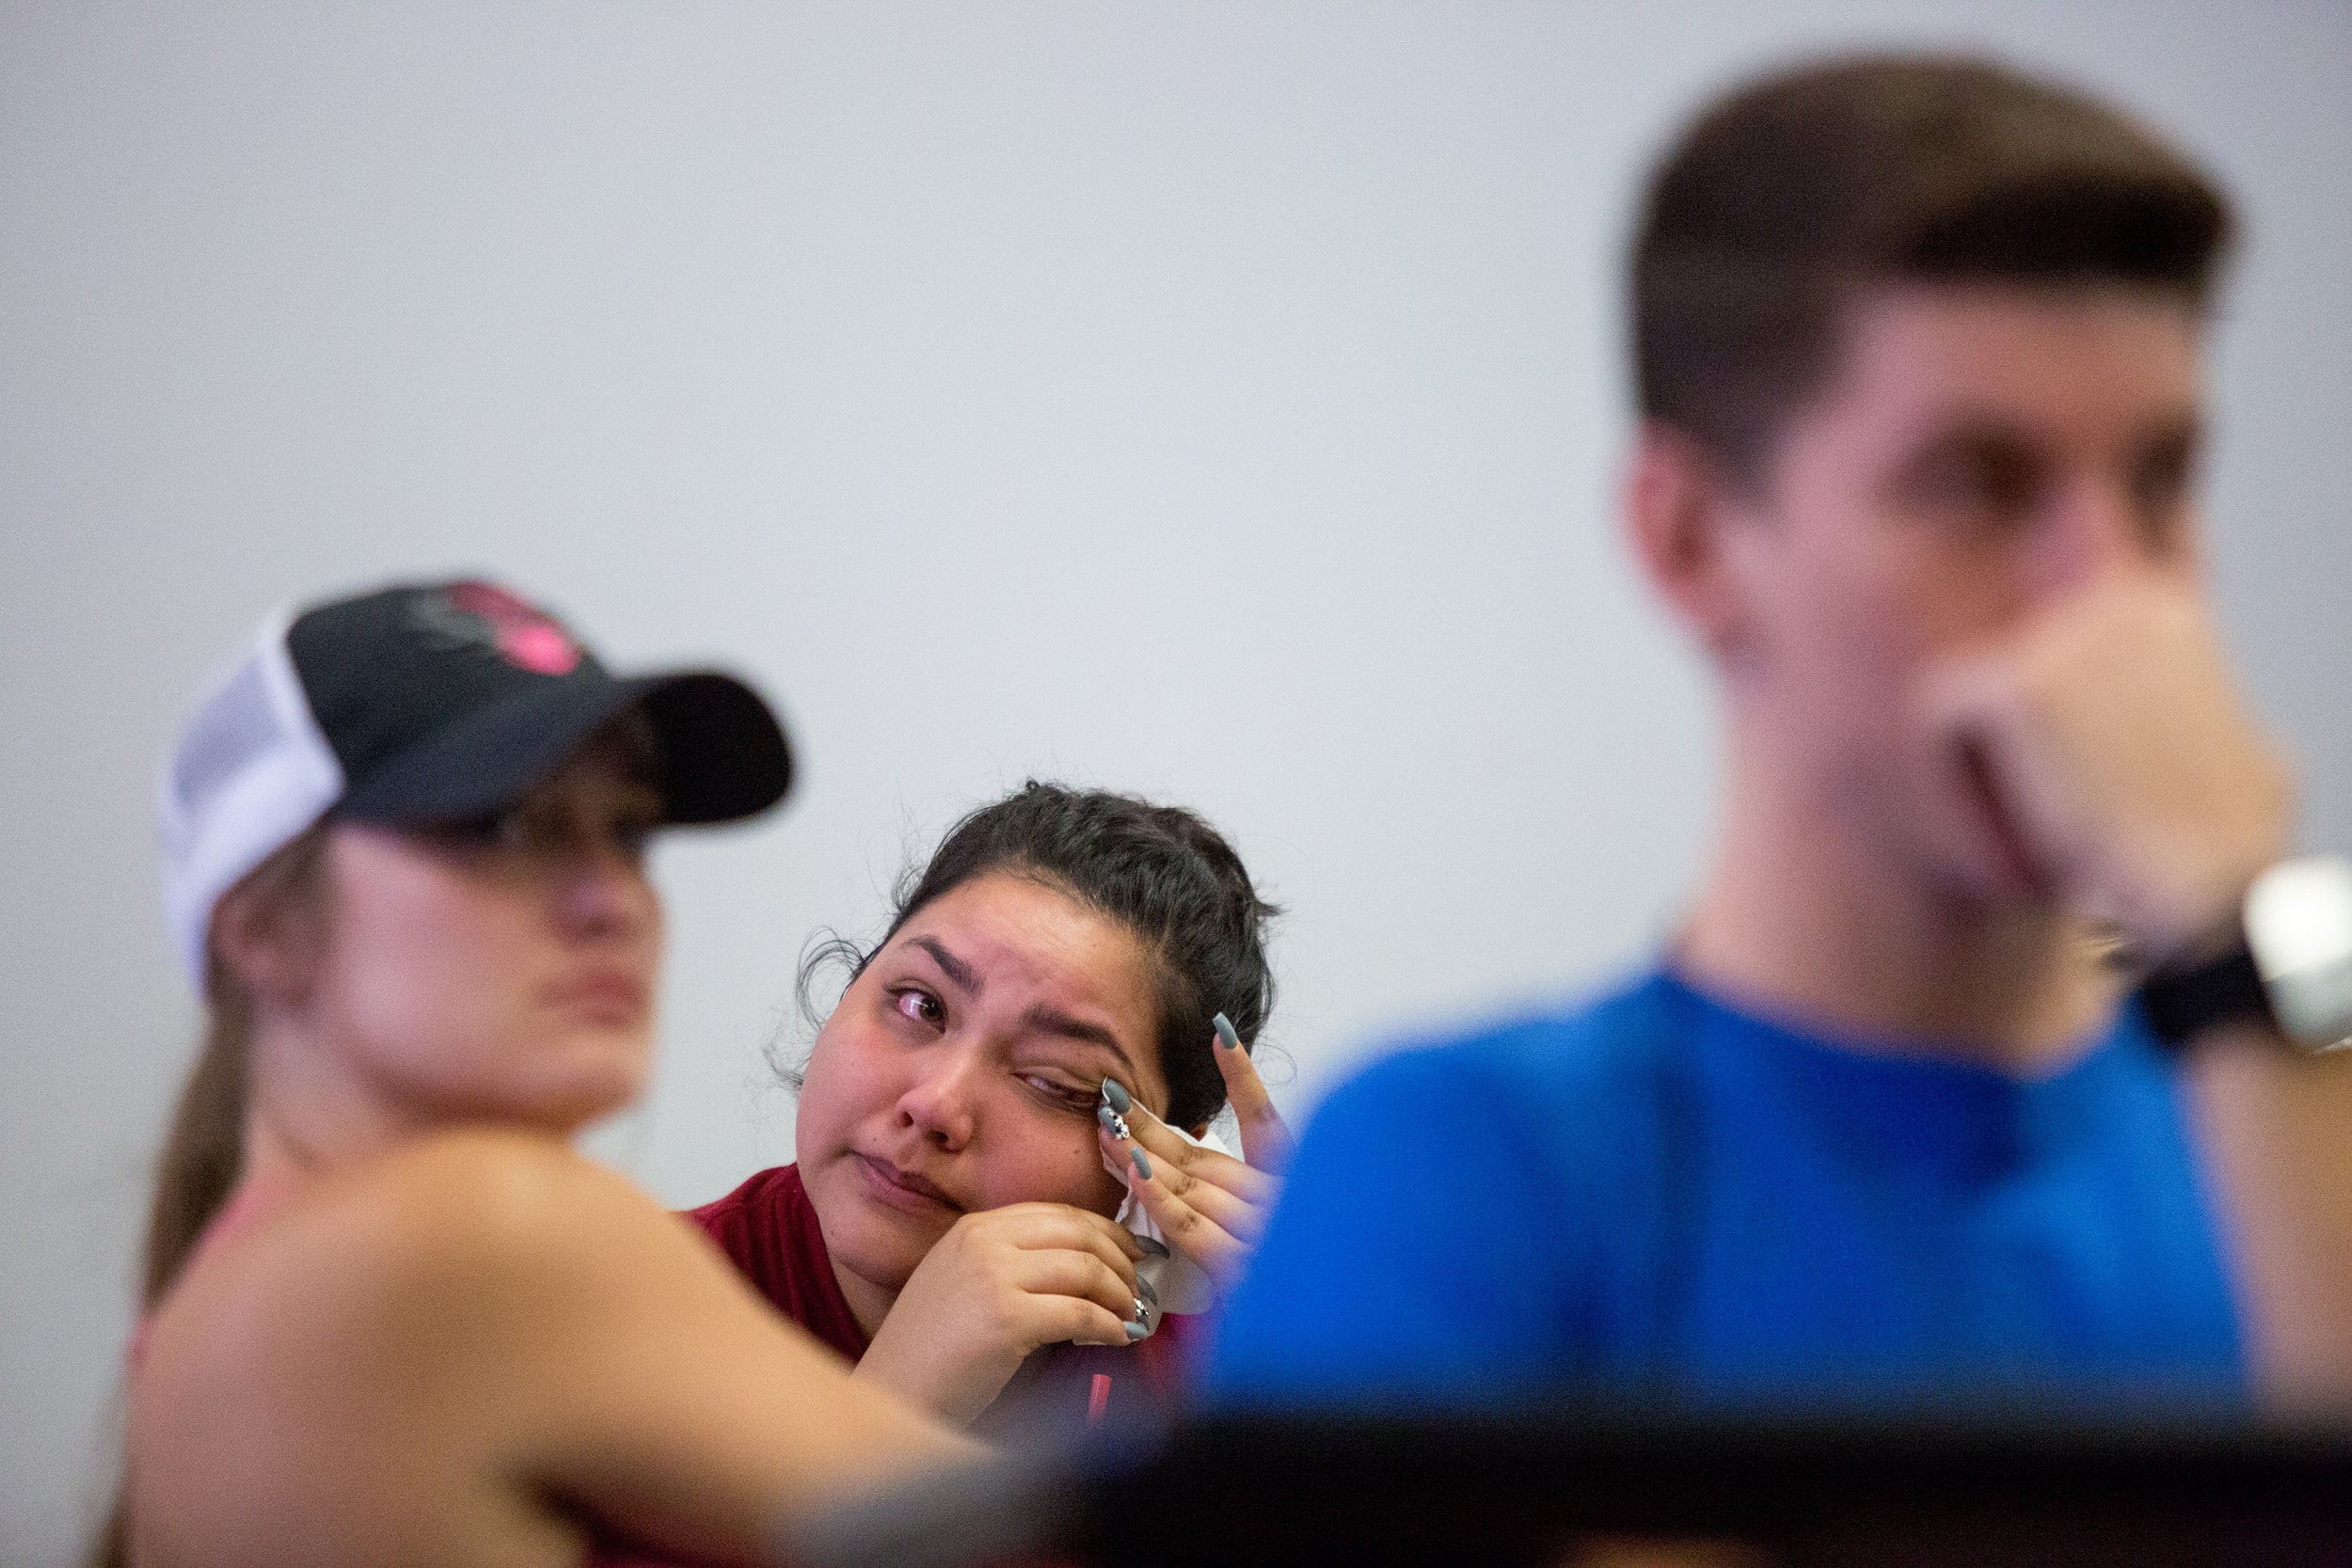  Maria Armenta (center) cries during Arizonans for Gun Safety’s talk with her classroom behavior strategies class at Arizona State University. When Armenta was a child, her best friend was walking home from school without her one day and was shot in 